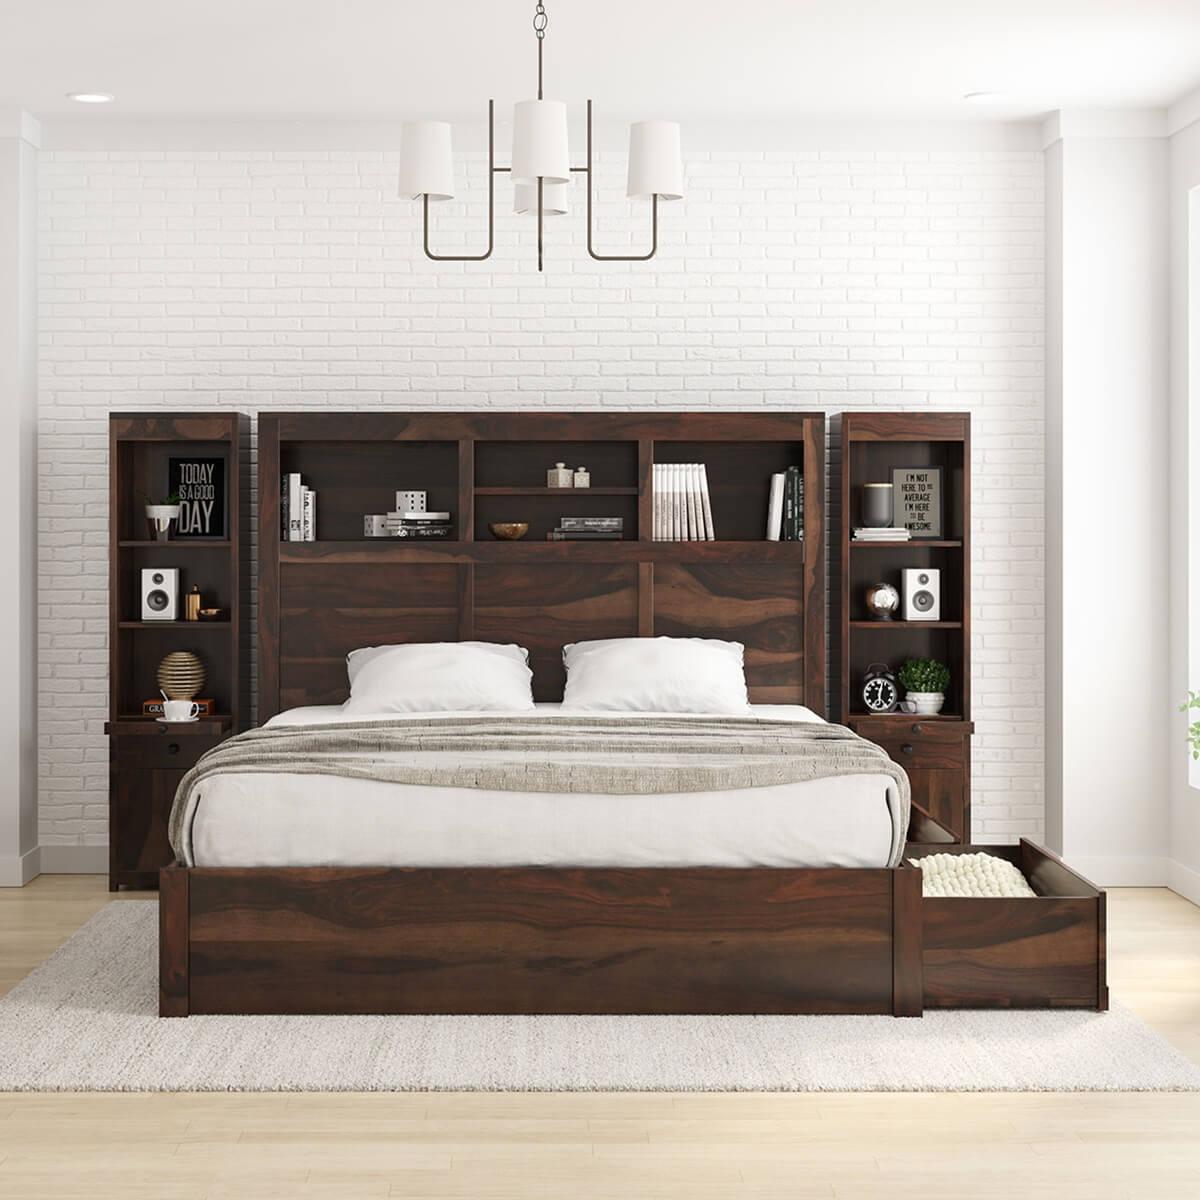 How To Attach A Headboard Any Bed, How To Attach A Headboard Box Spring